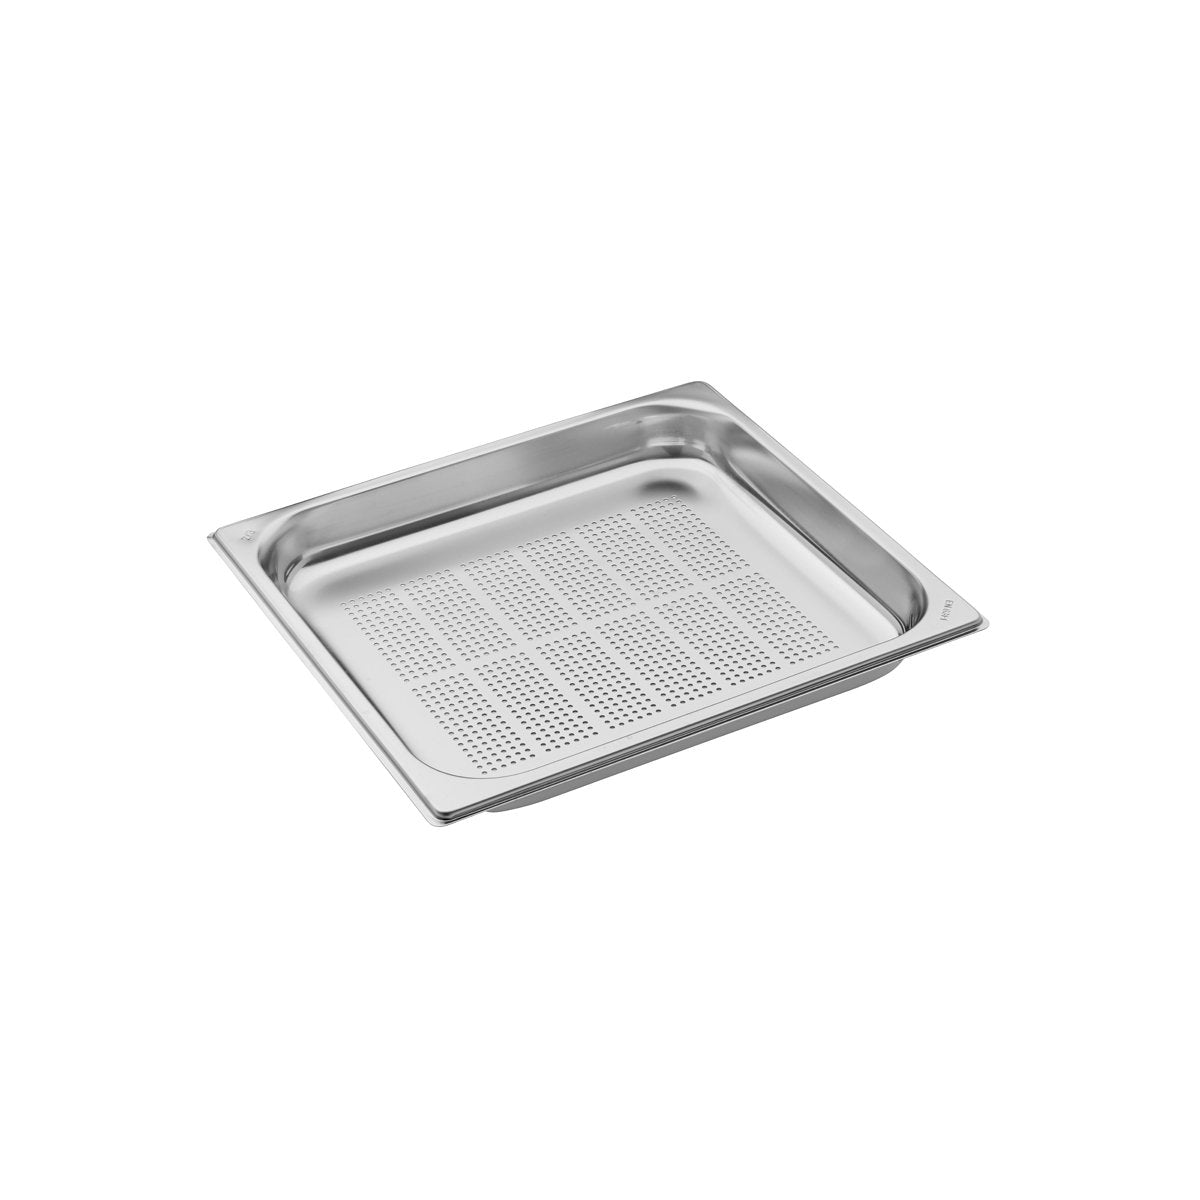 MP-23040 Inox Macel Maxipan Gastronorm Perforated Base Only 2/3 Size 40mm Tomkin Australia Hospitality Supplies